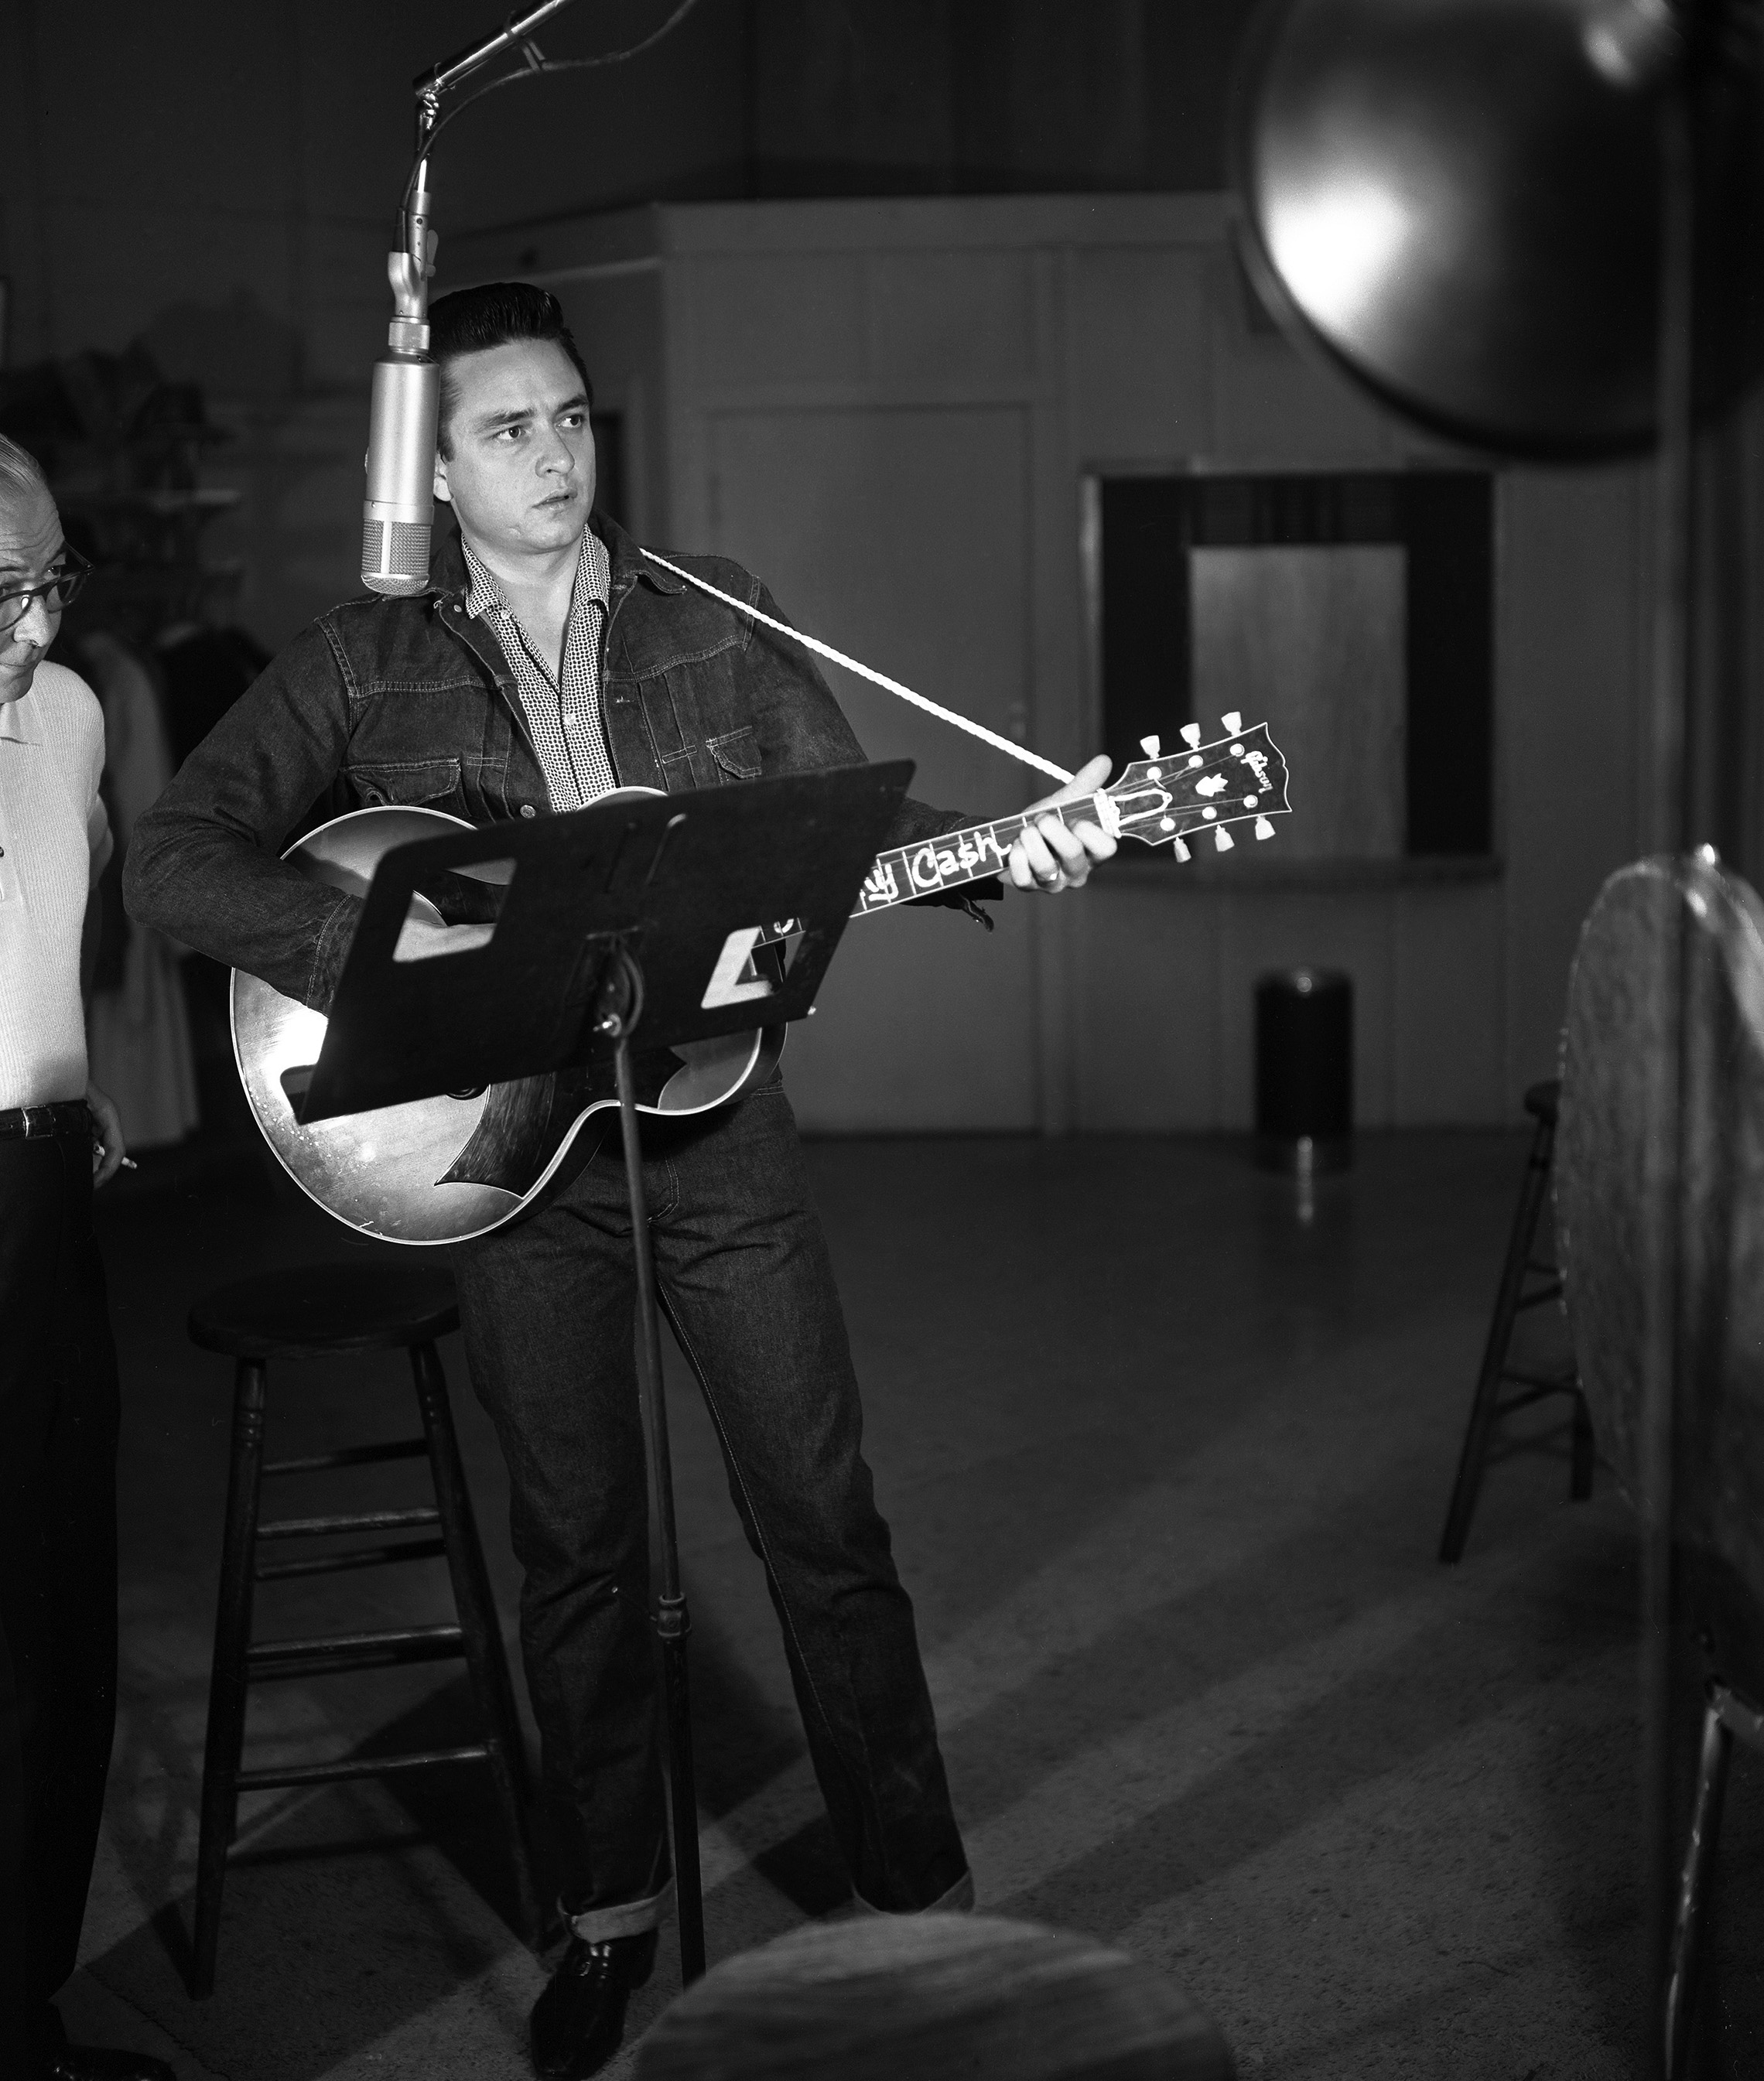 1958: Johnny Cash recording with Columbia Records producer Don Law at Bradley Studio which was bought by Columbia Records in 1962. (Photo by Elmer Williams/Country Music Hall of Fame and Museum/Getty Images)